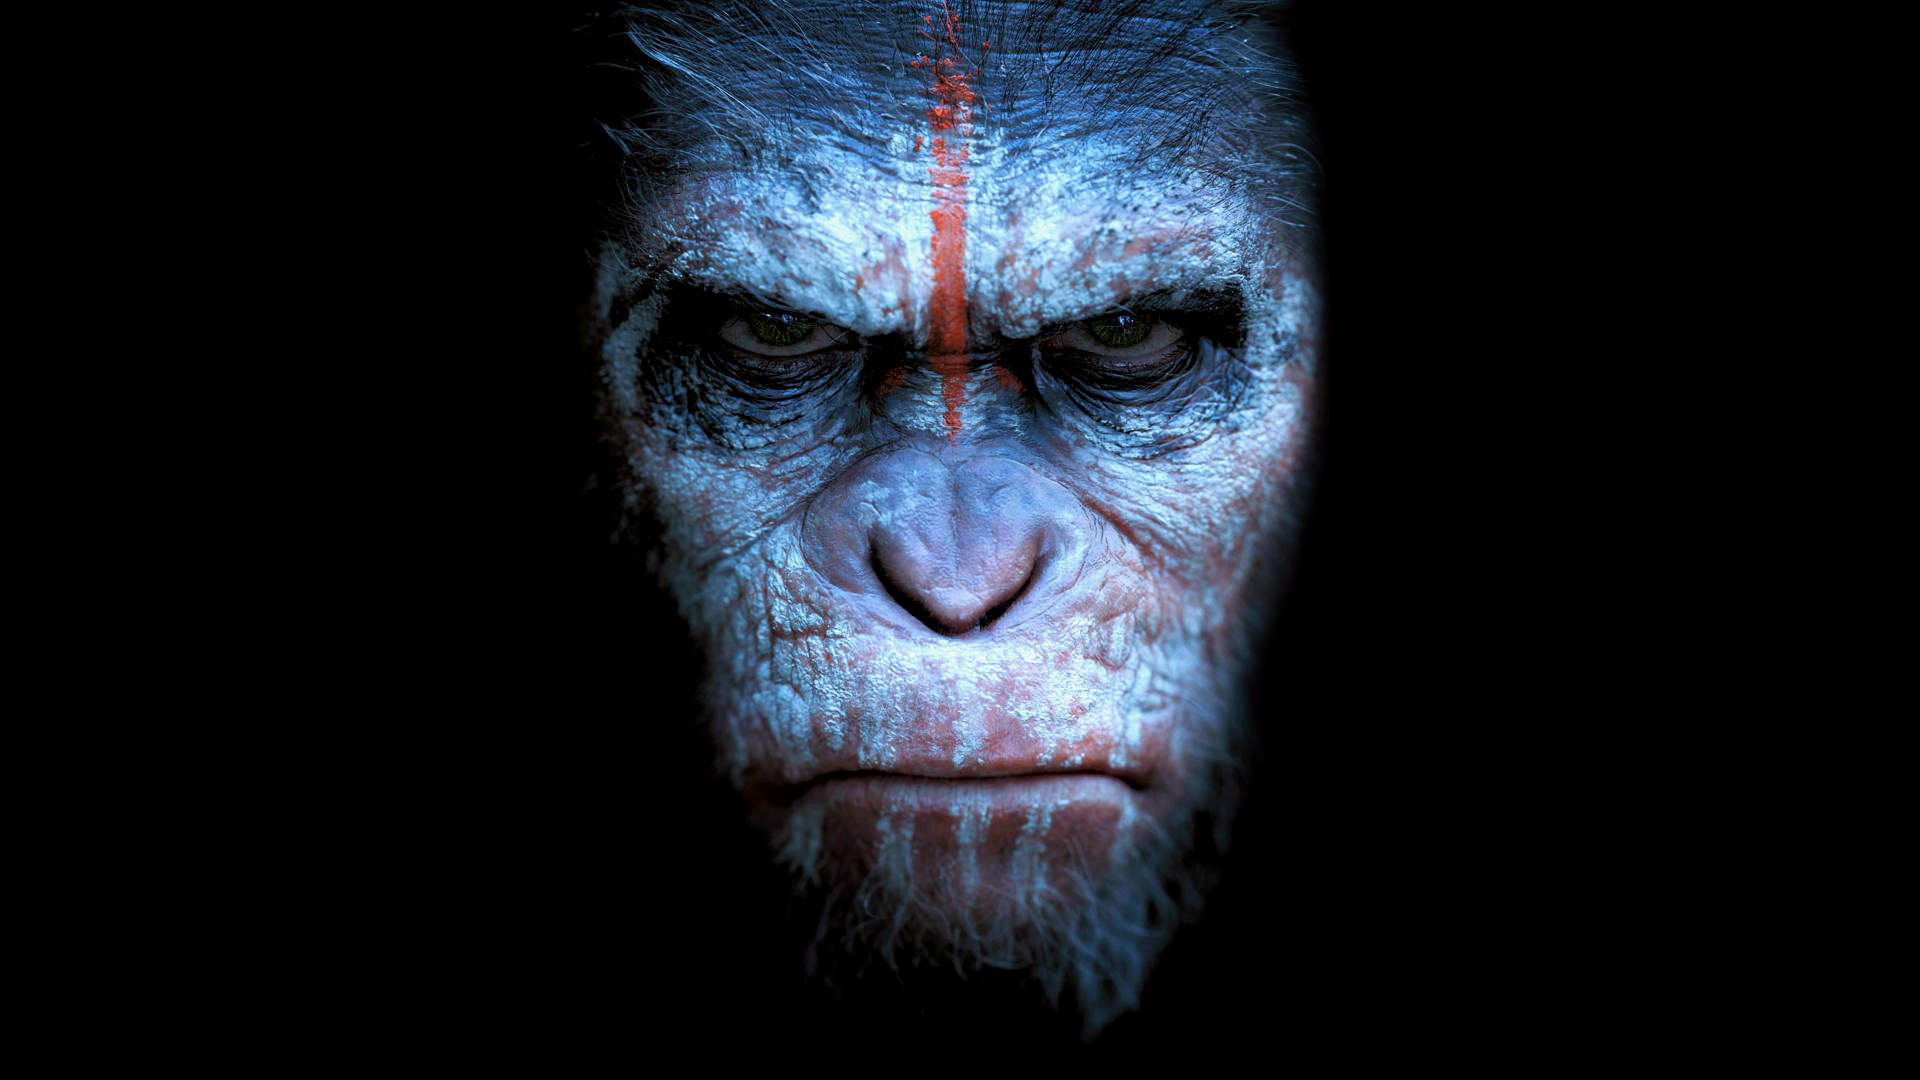 dawn of the apes, Action, Drama, Sci fi, Dawn, Planet, Apes, Monkey, Adventure,  48 Wallpaper